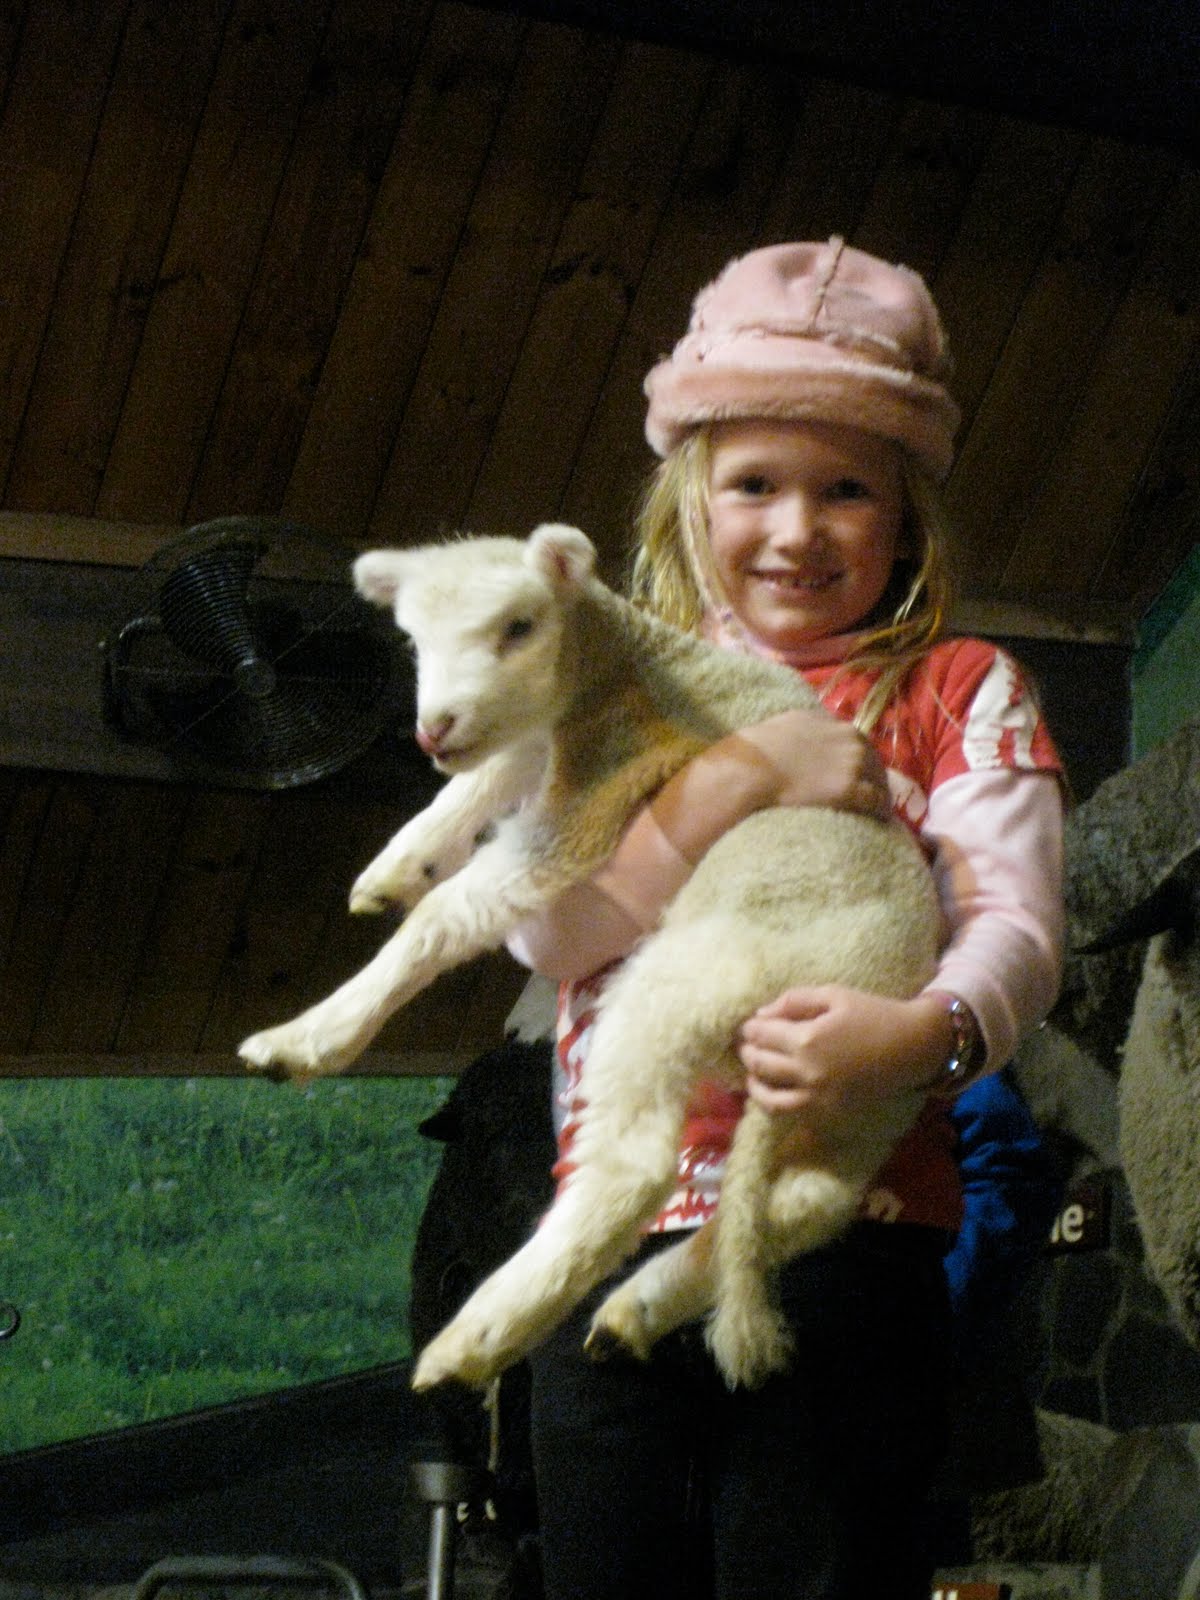 the friendly sheep showing